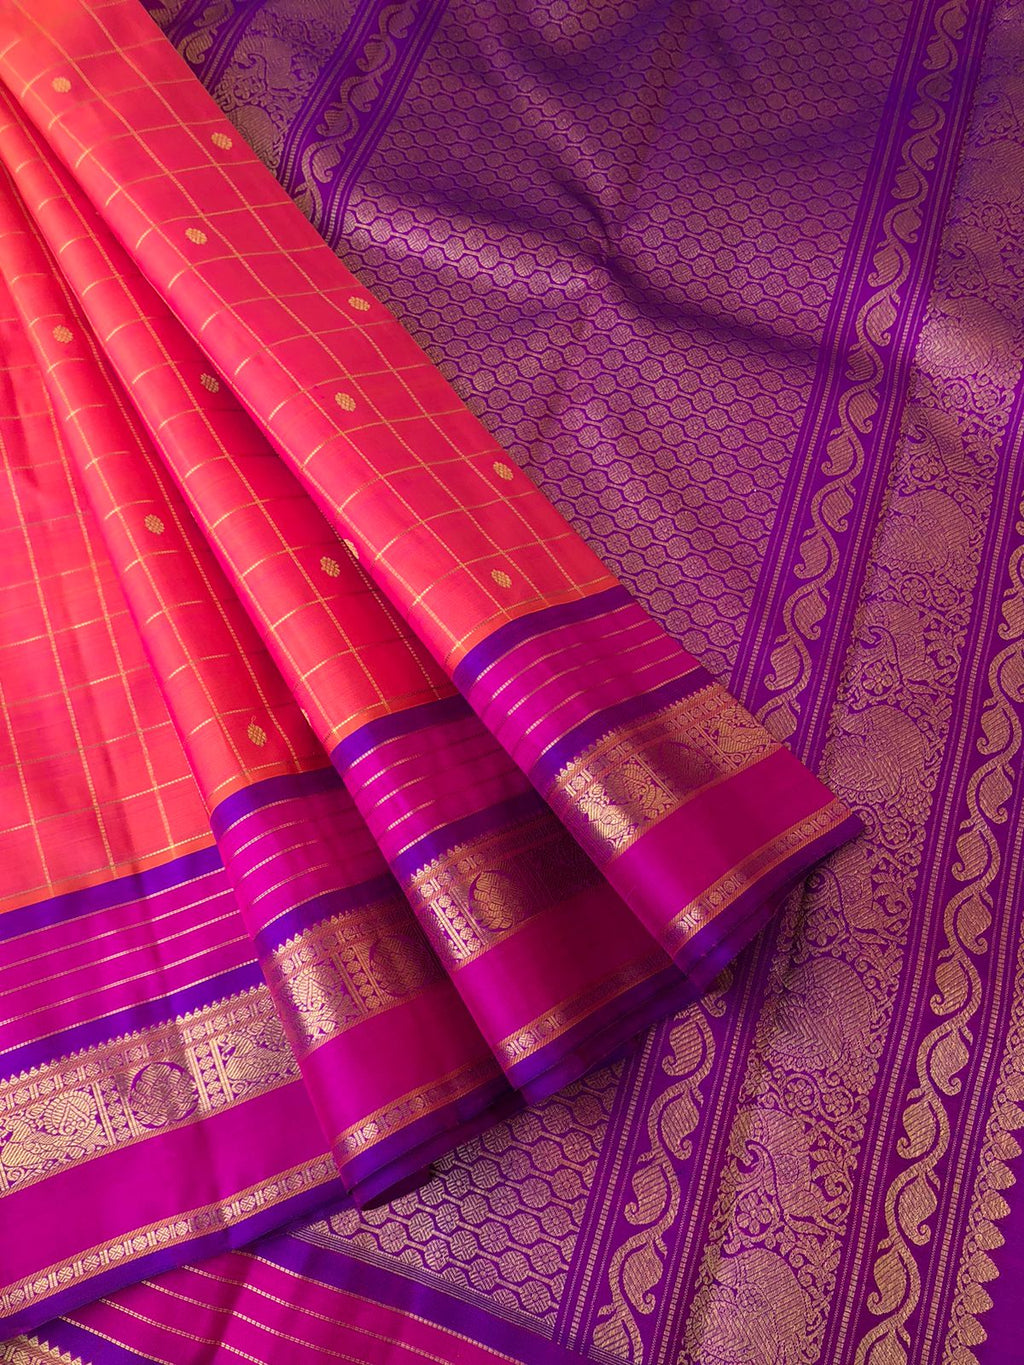 Vintage Ragas on Kanchivaram - beautiful orangish pink korvai Kanchivaram with chex buttas woven body with most traditional woven borders